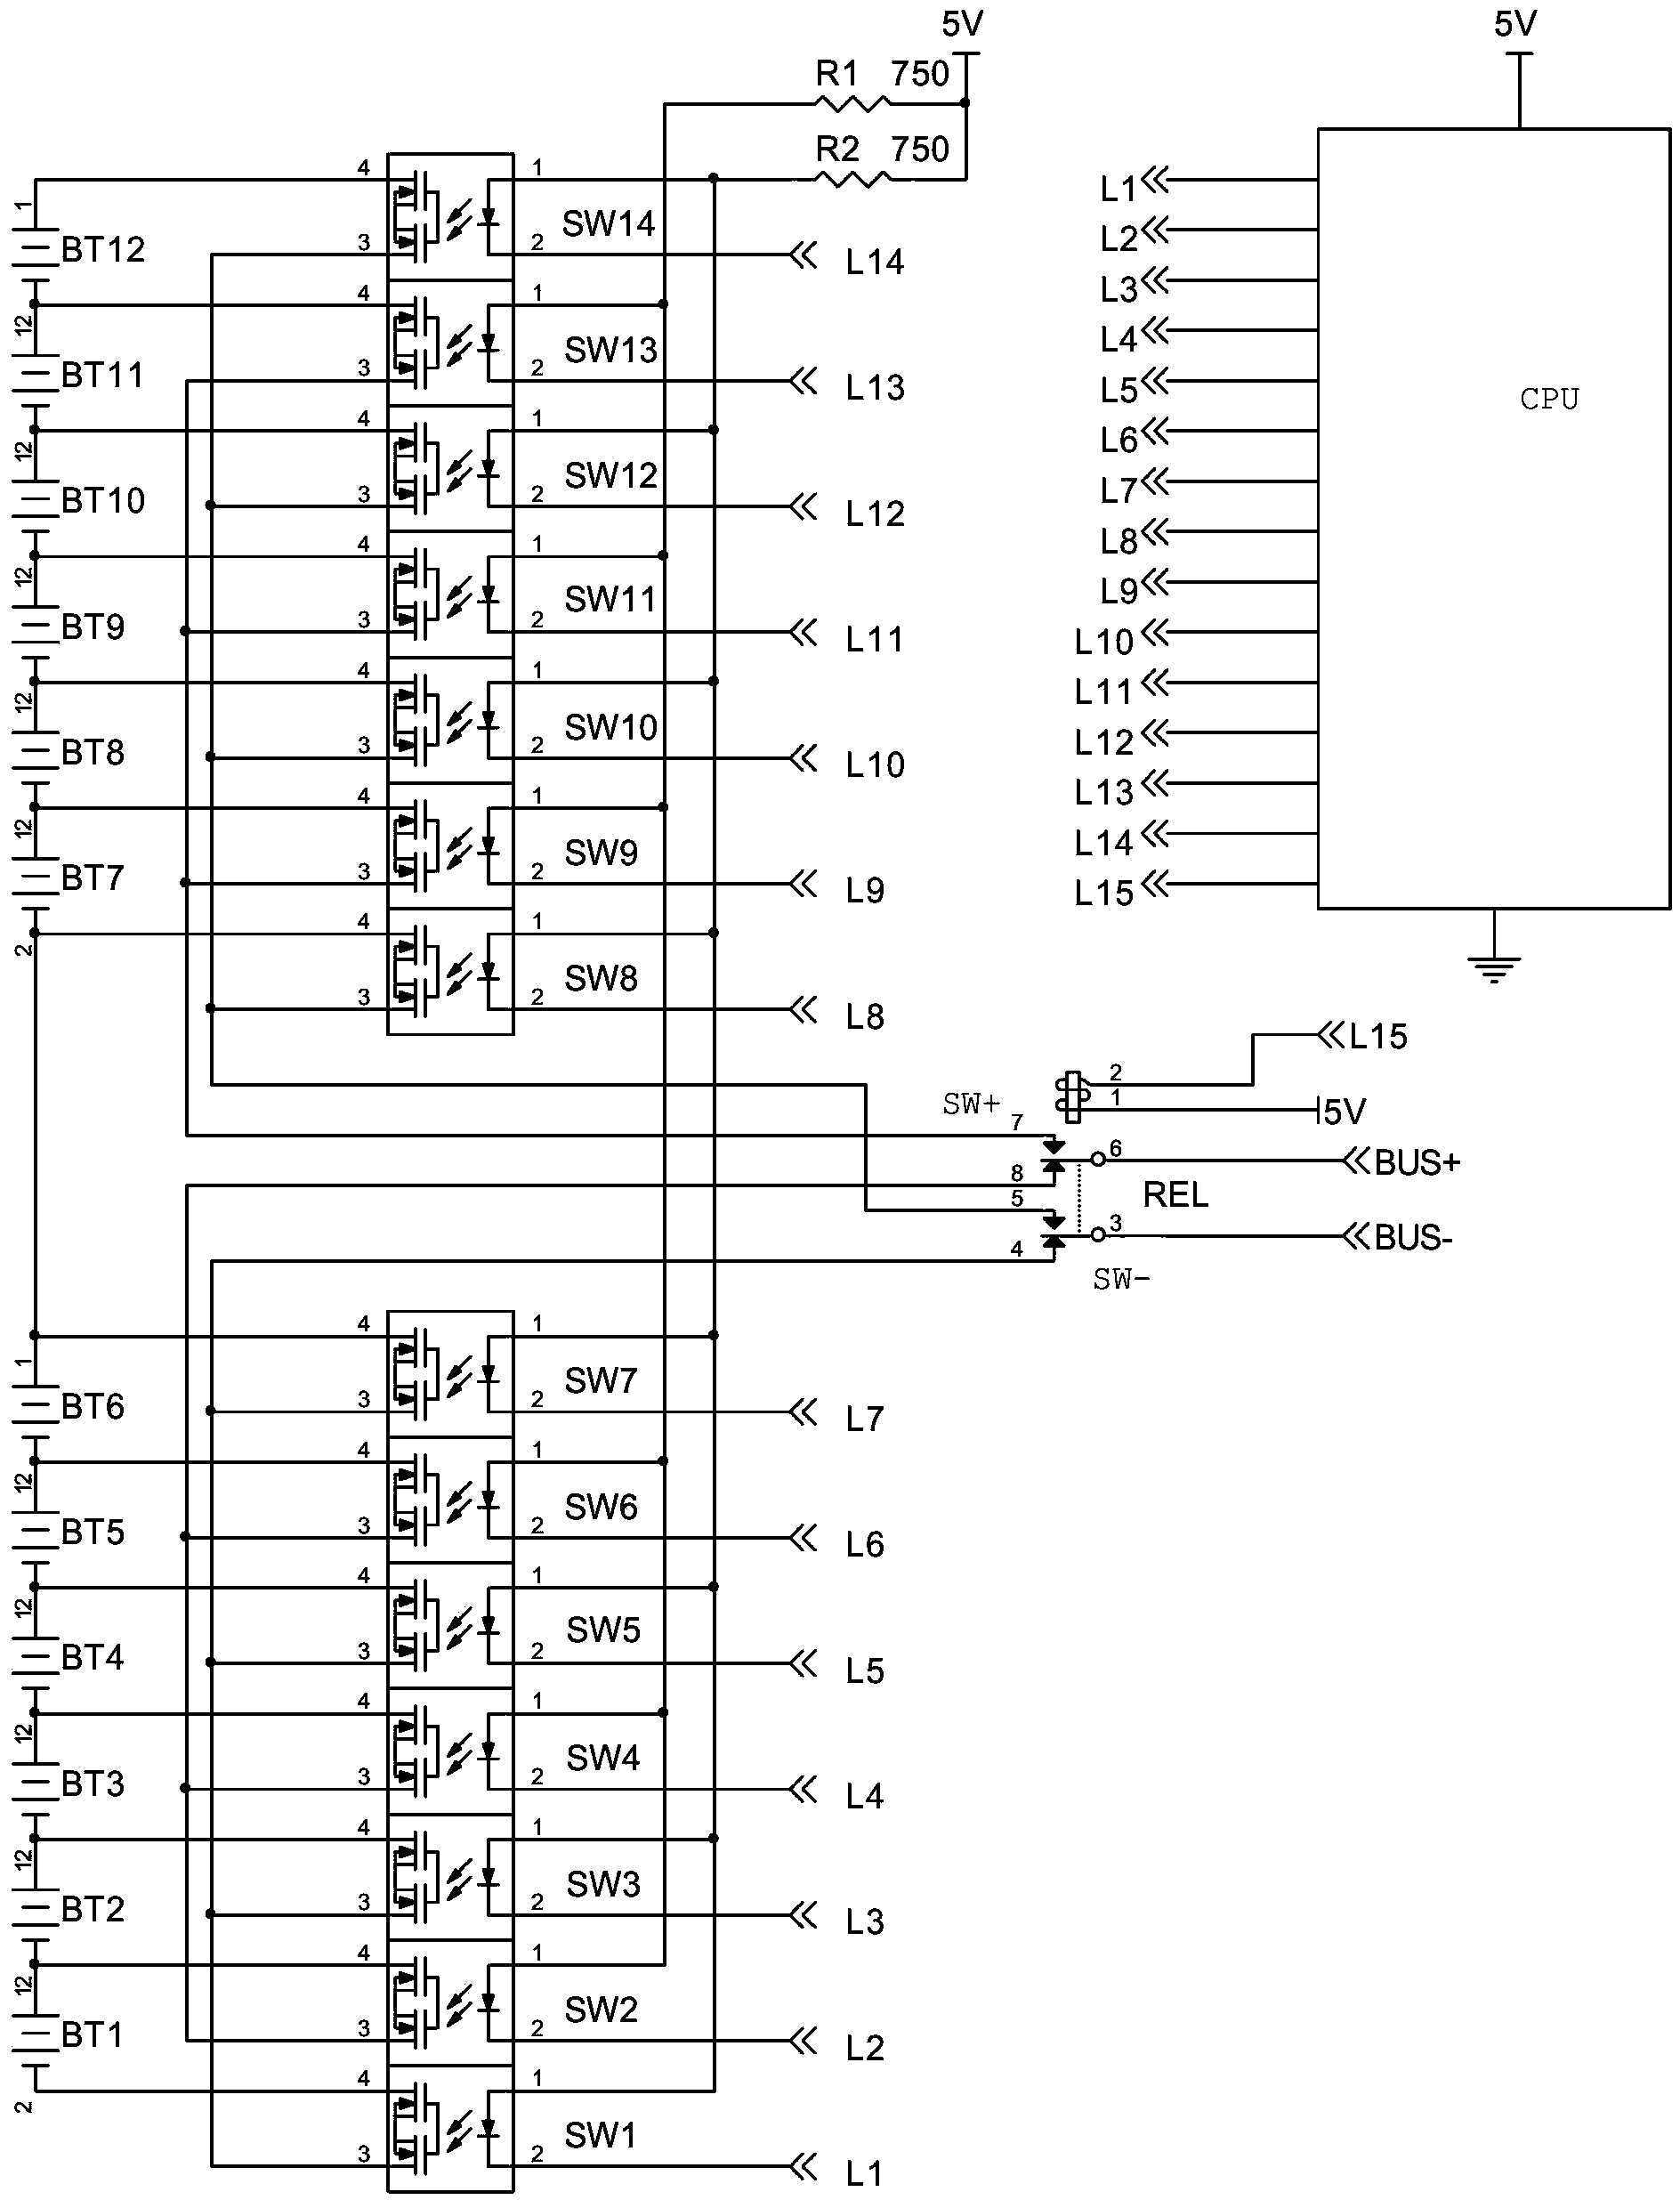 Balanced switching control circuit for battery management system